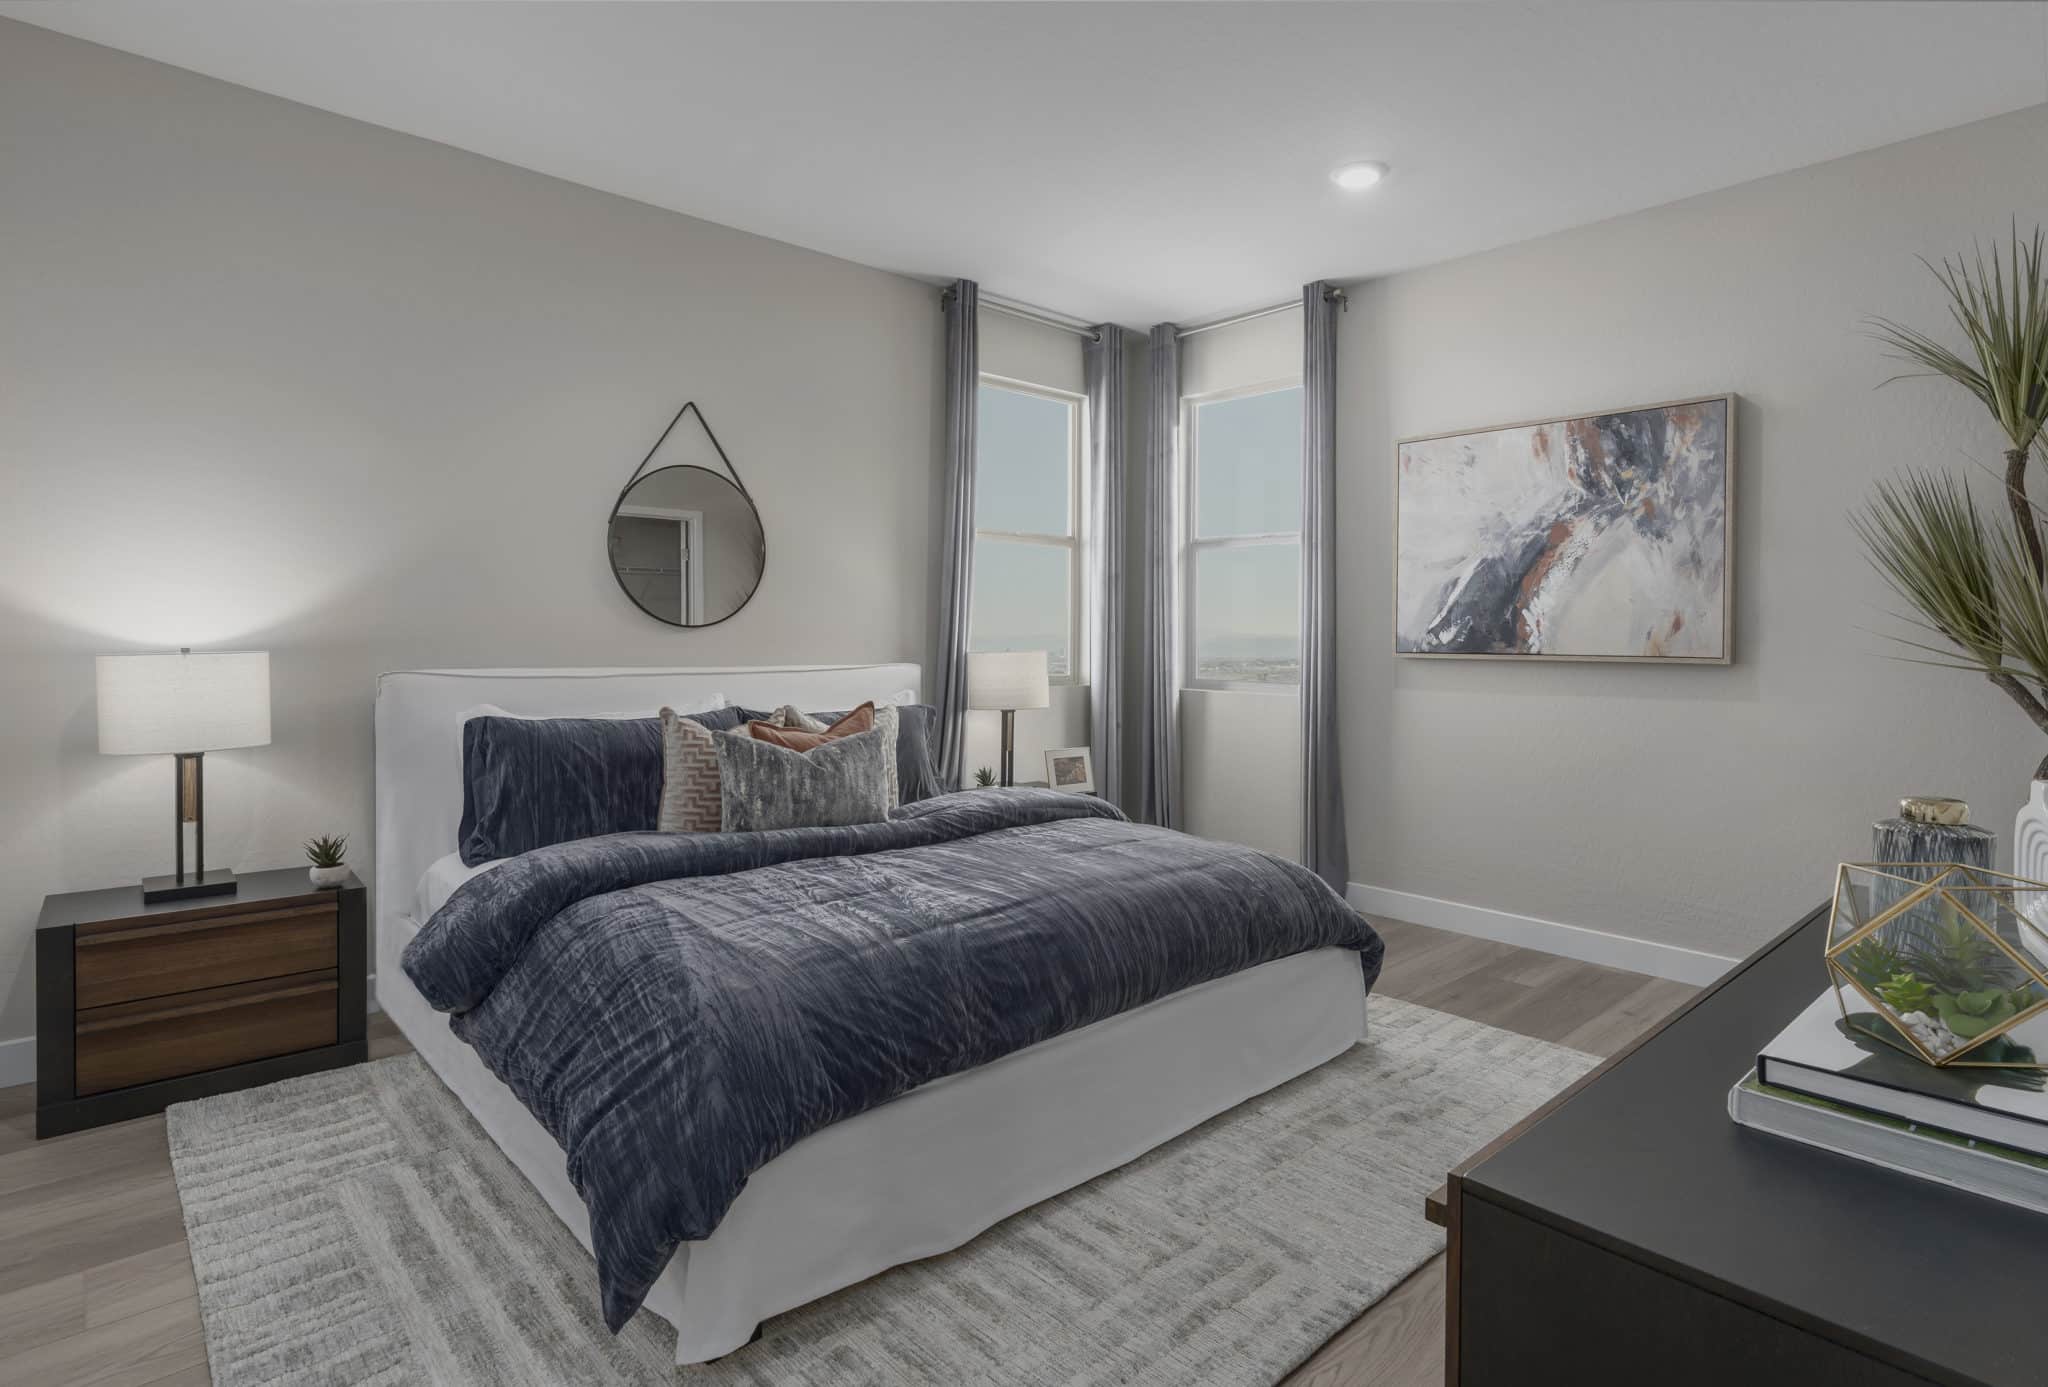 Primary Bedroom of Plan 2114 at Nighthawk by KB Home